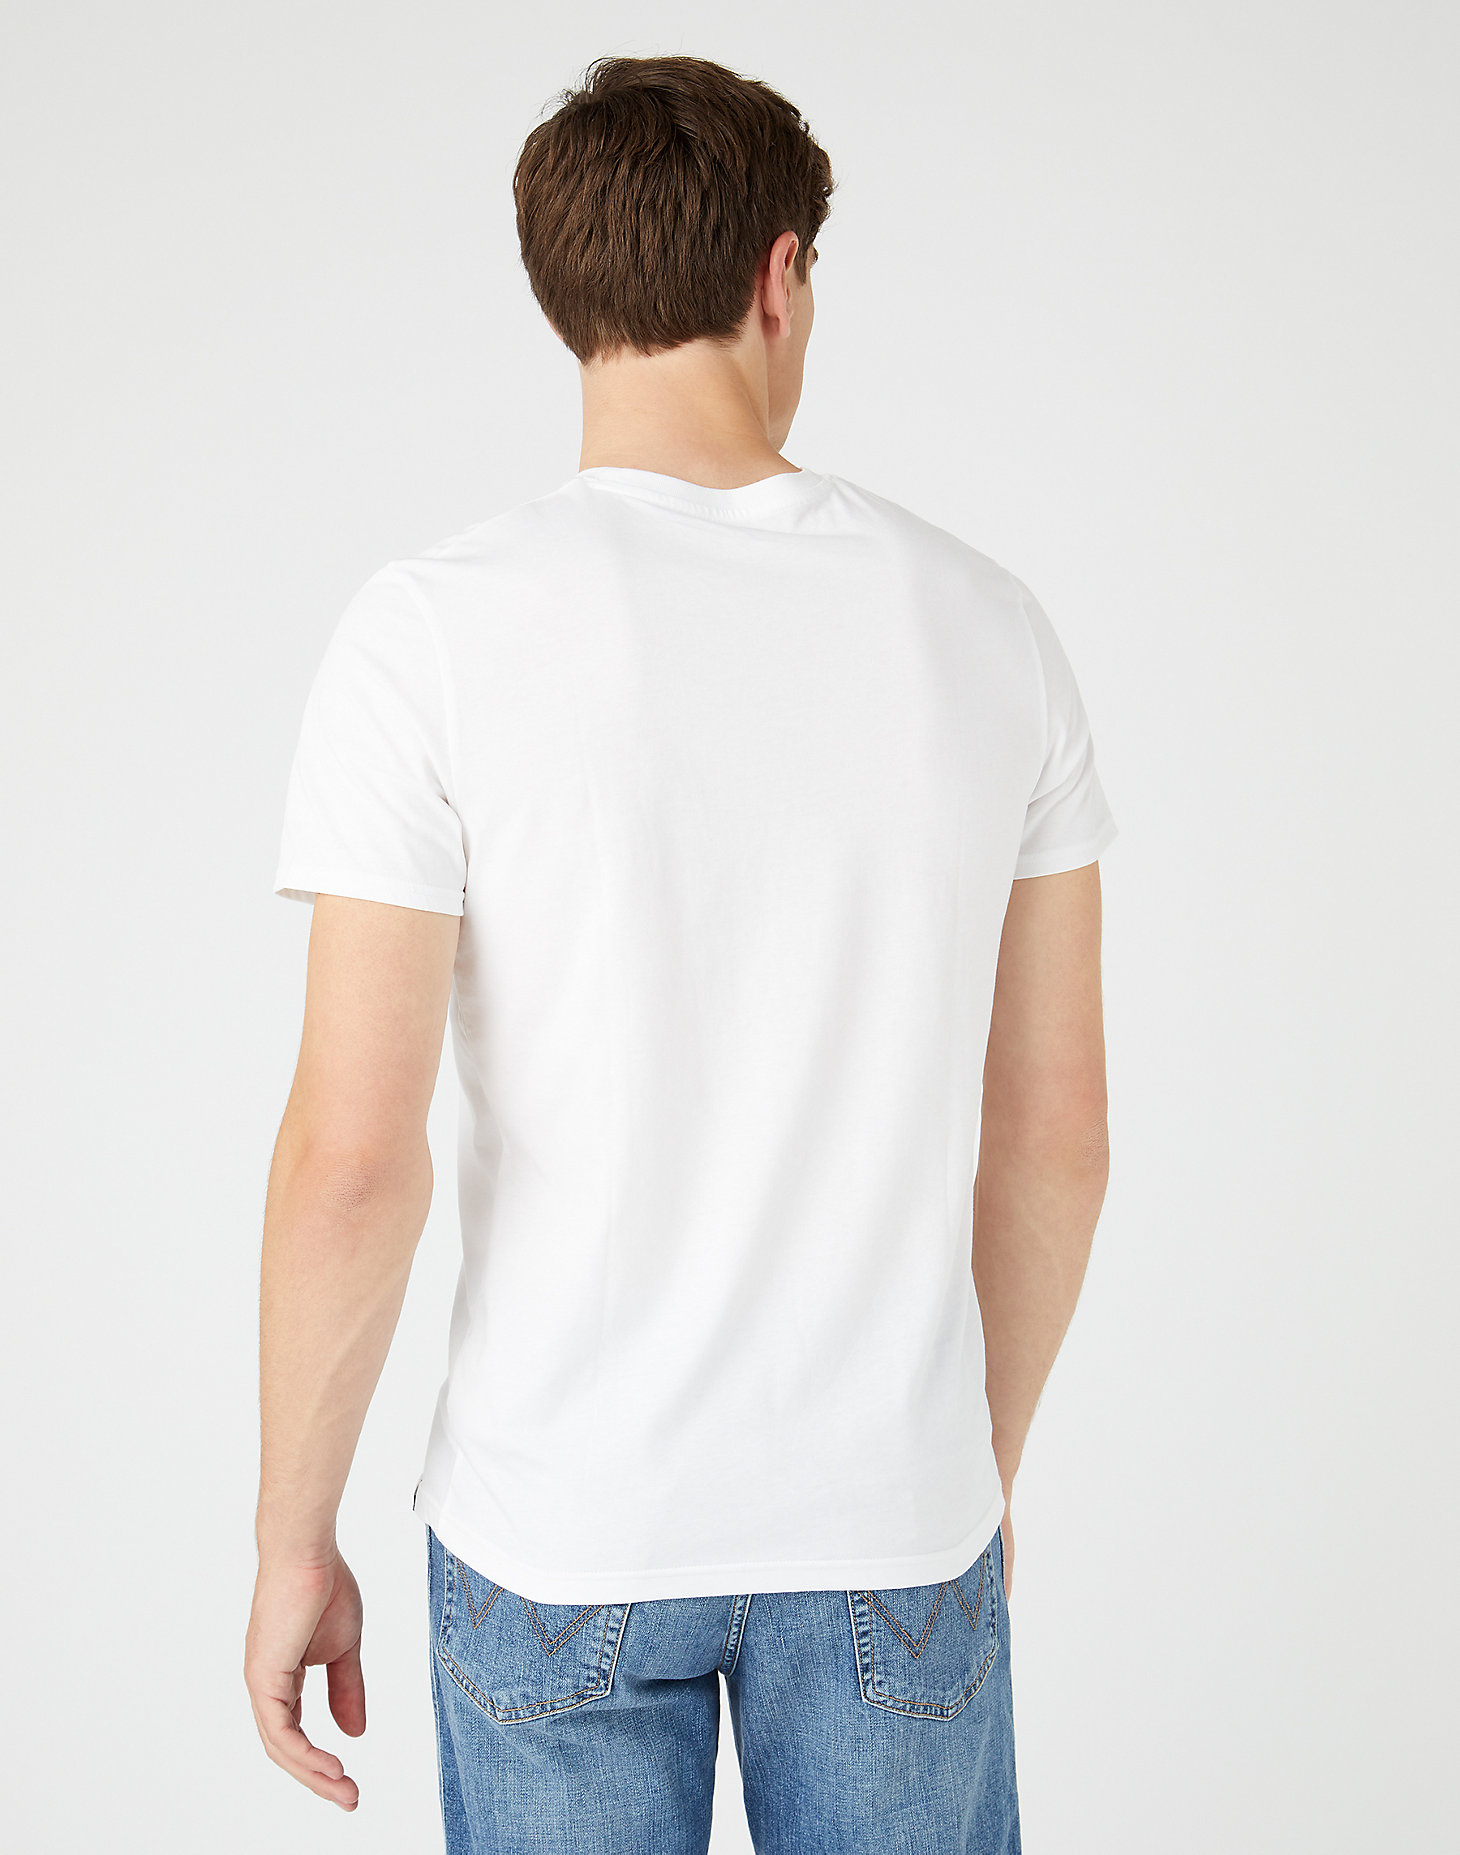 Short Sleeve Two Pack Tee in White alternative view 2